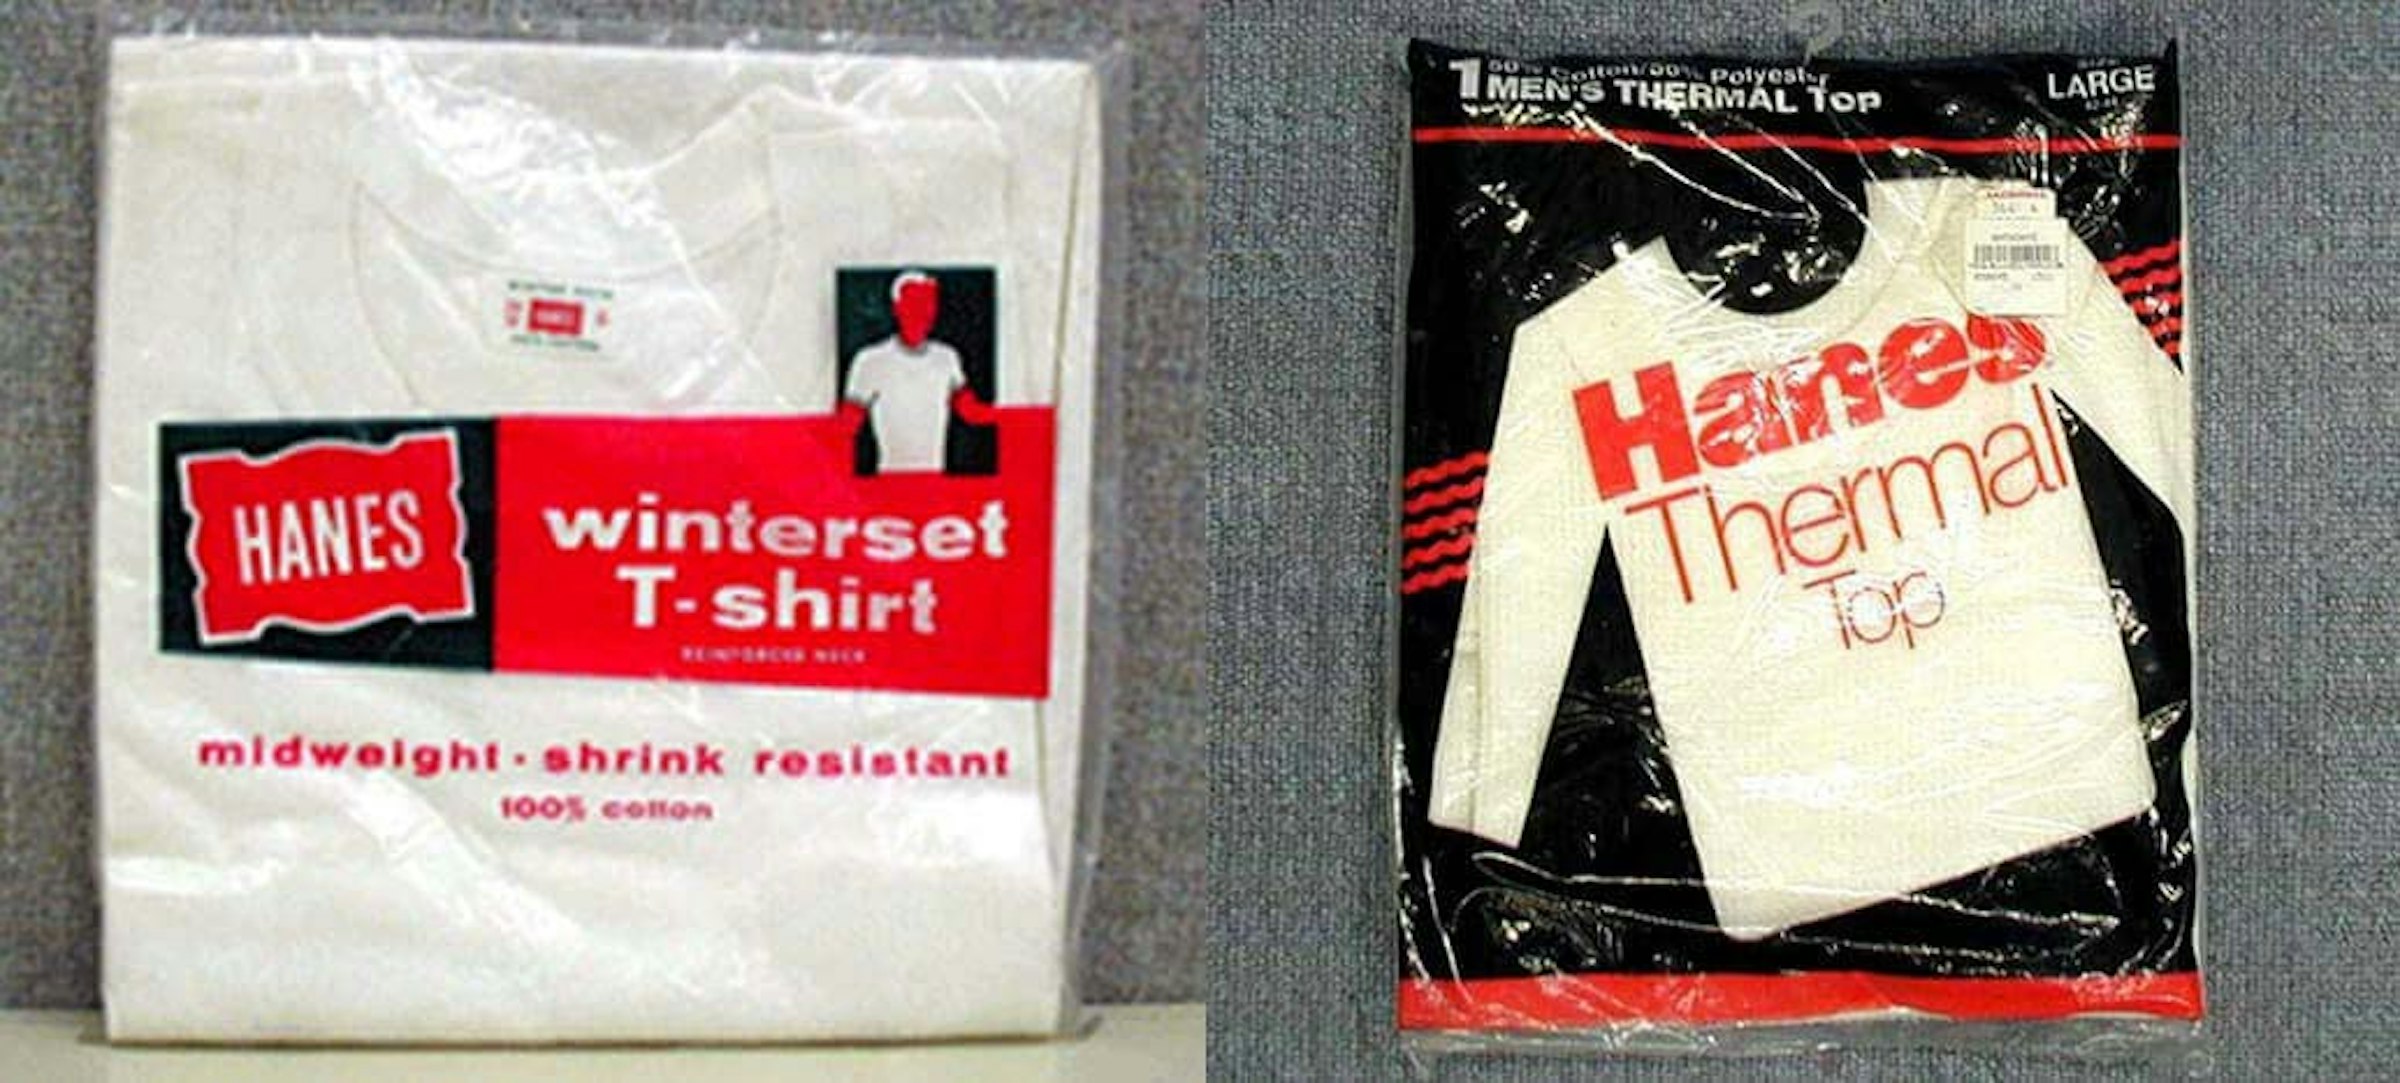 Left-hand side: Hanes Winter Set T-Shirt when it was released, Right-hand side: Thermal Top when it was released